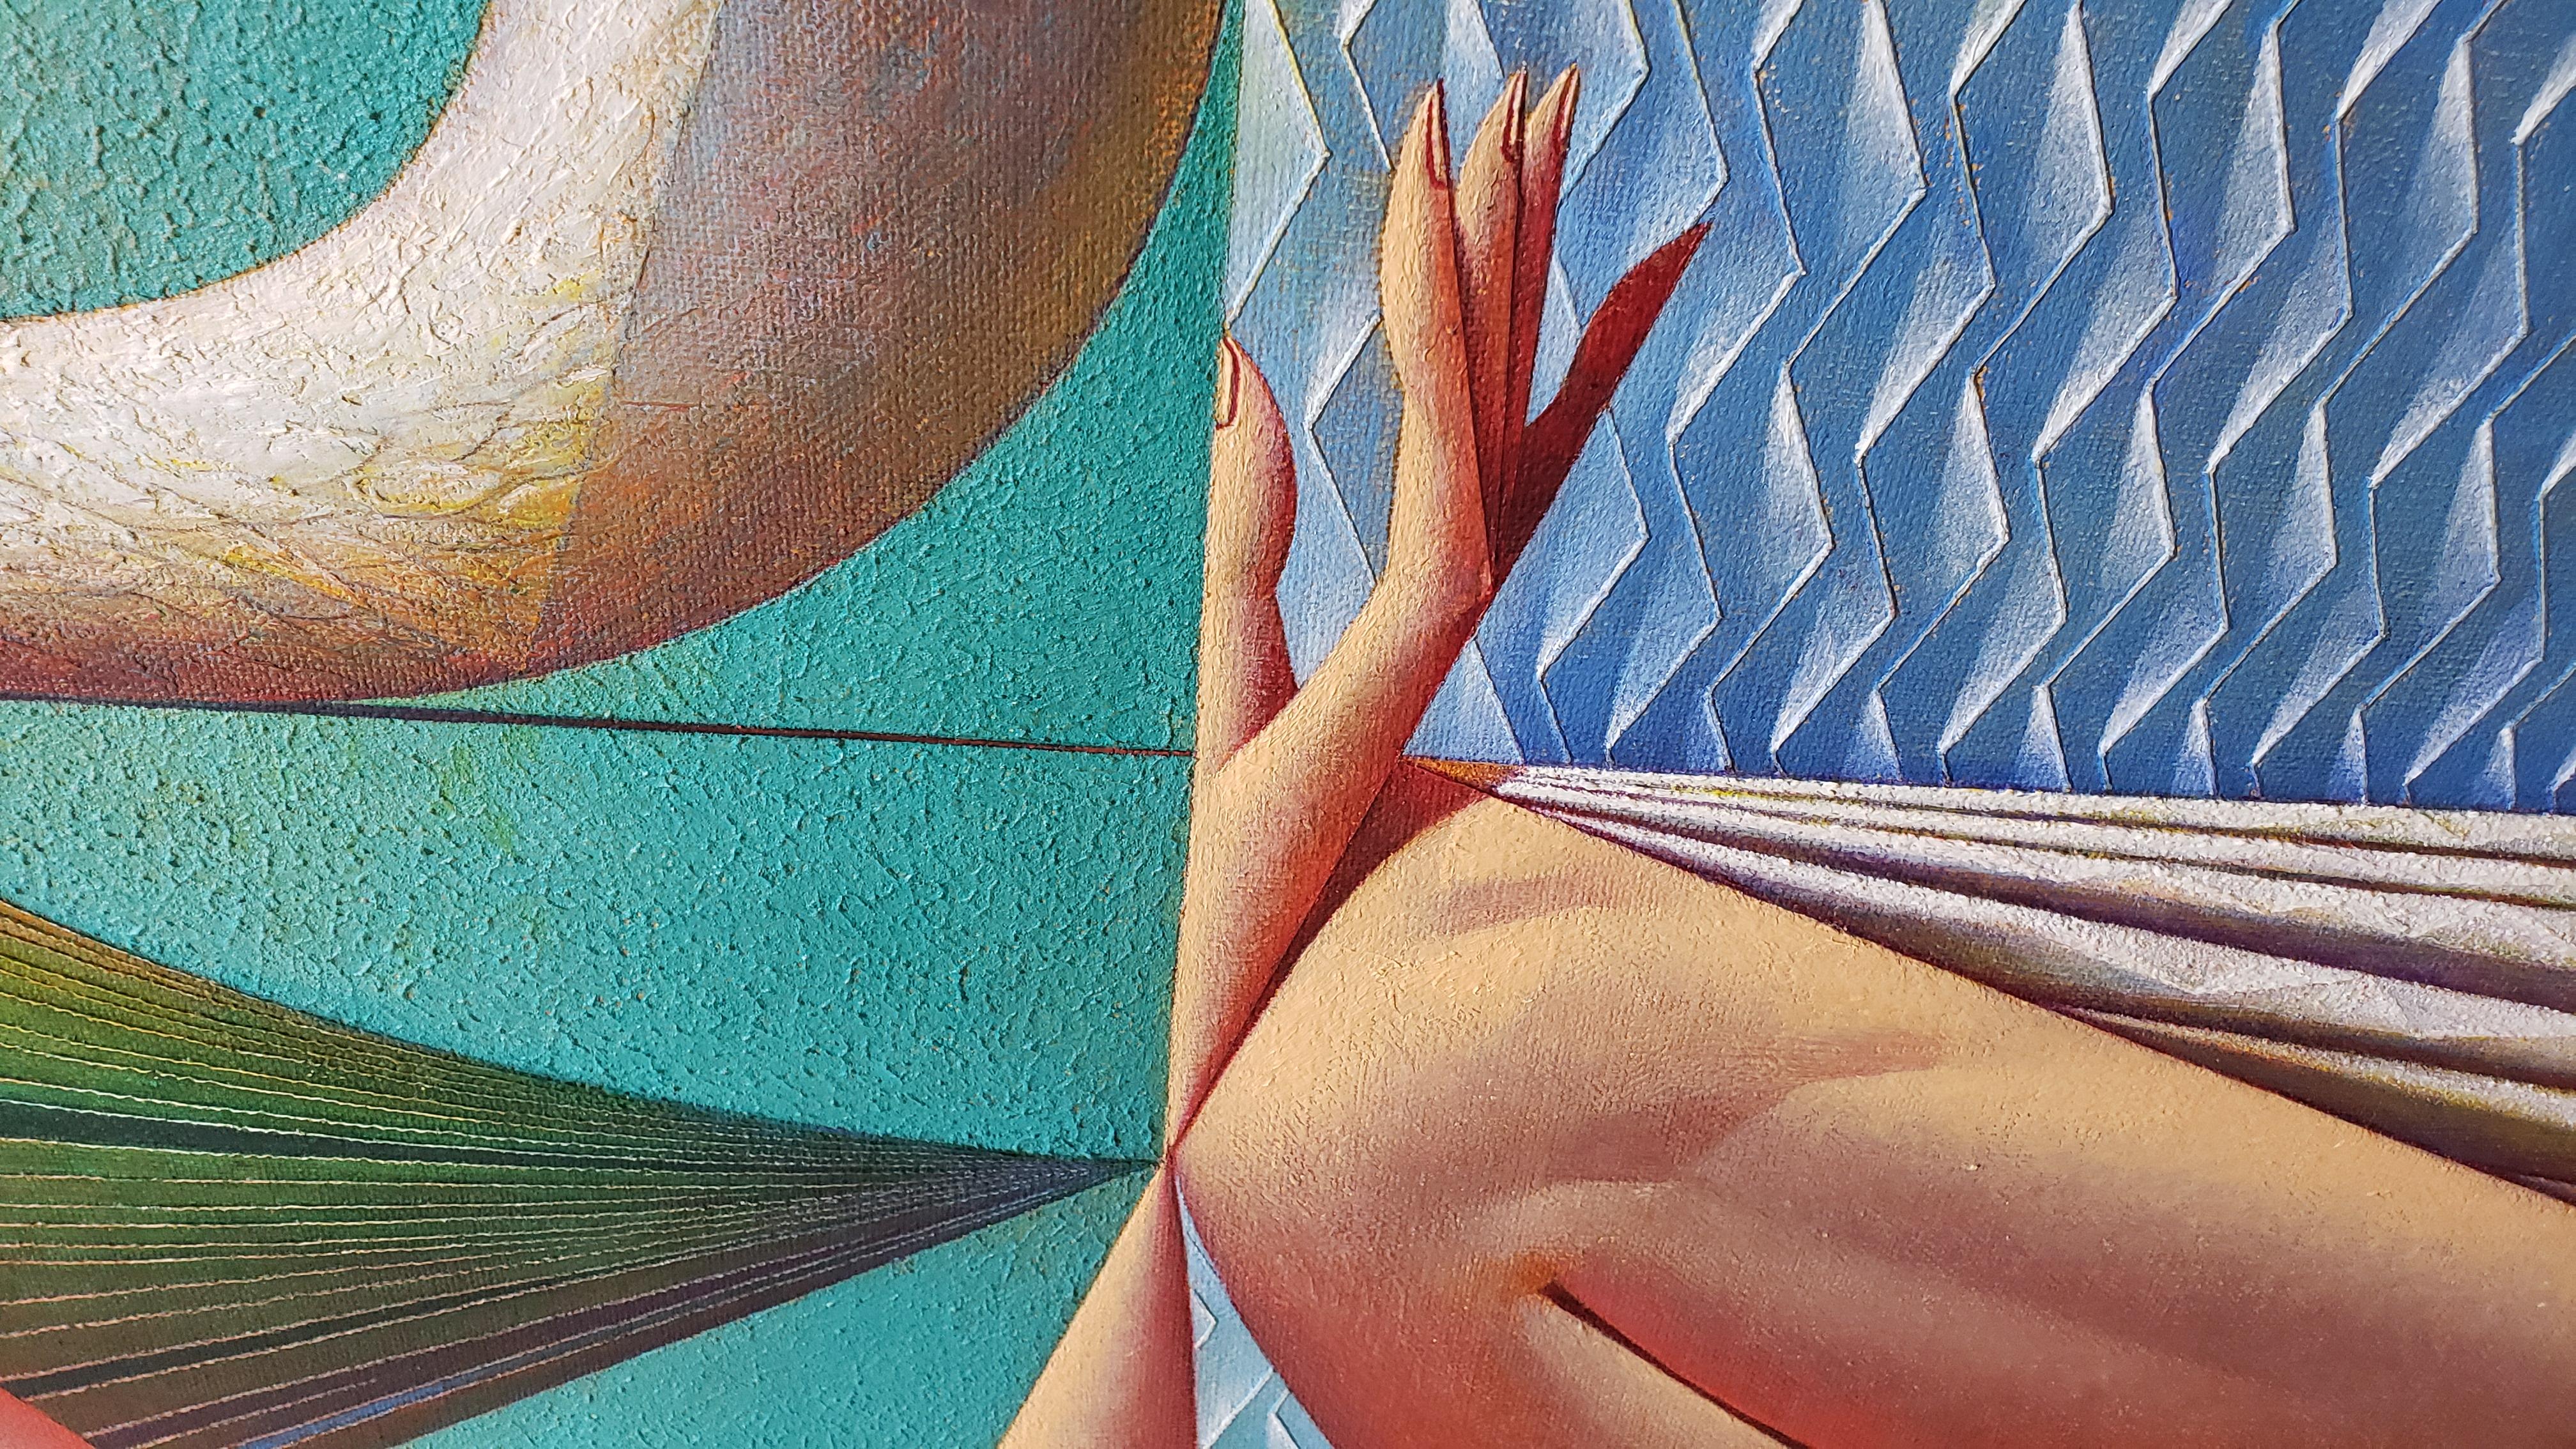 Georgy Kurasov is an artist of striking individuality in both his thought patterns and his painting and sculpture style. Intricate, sensual, and executed with mathematical precision, his works transport the viewer into his perfect fantasy world.